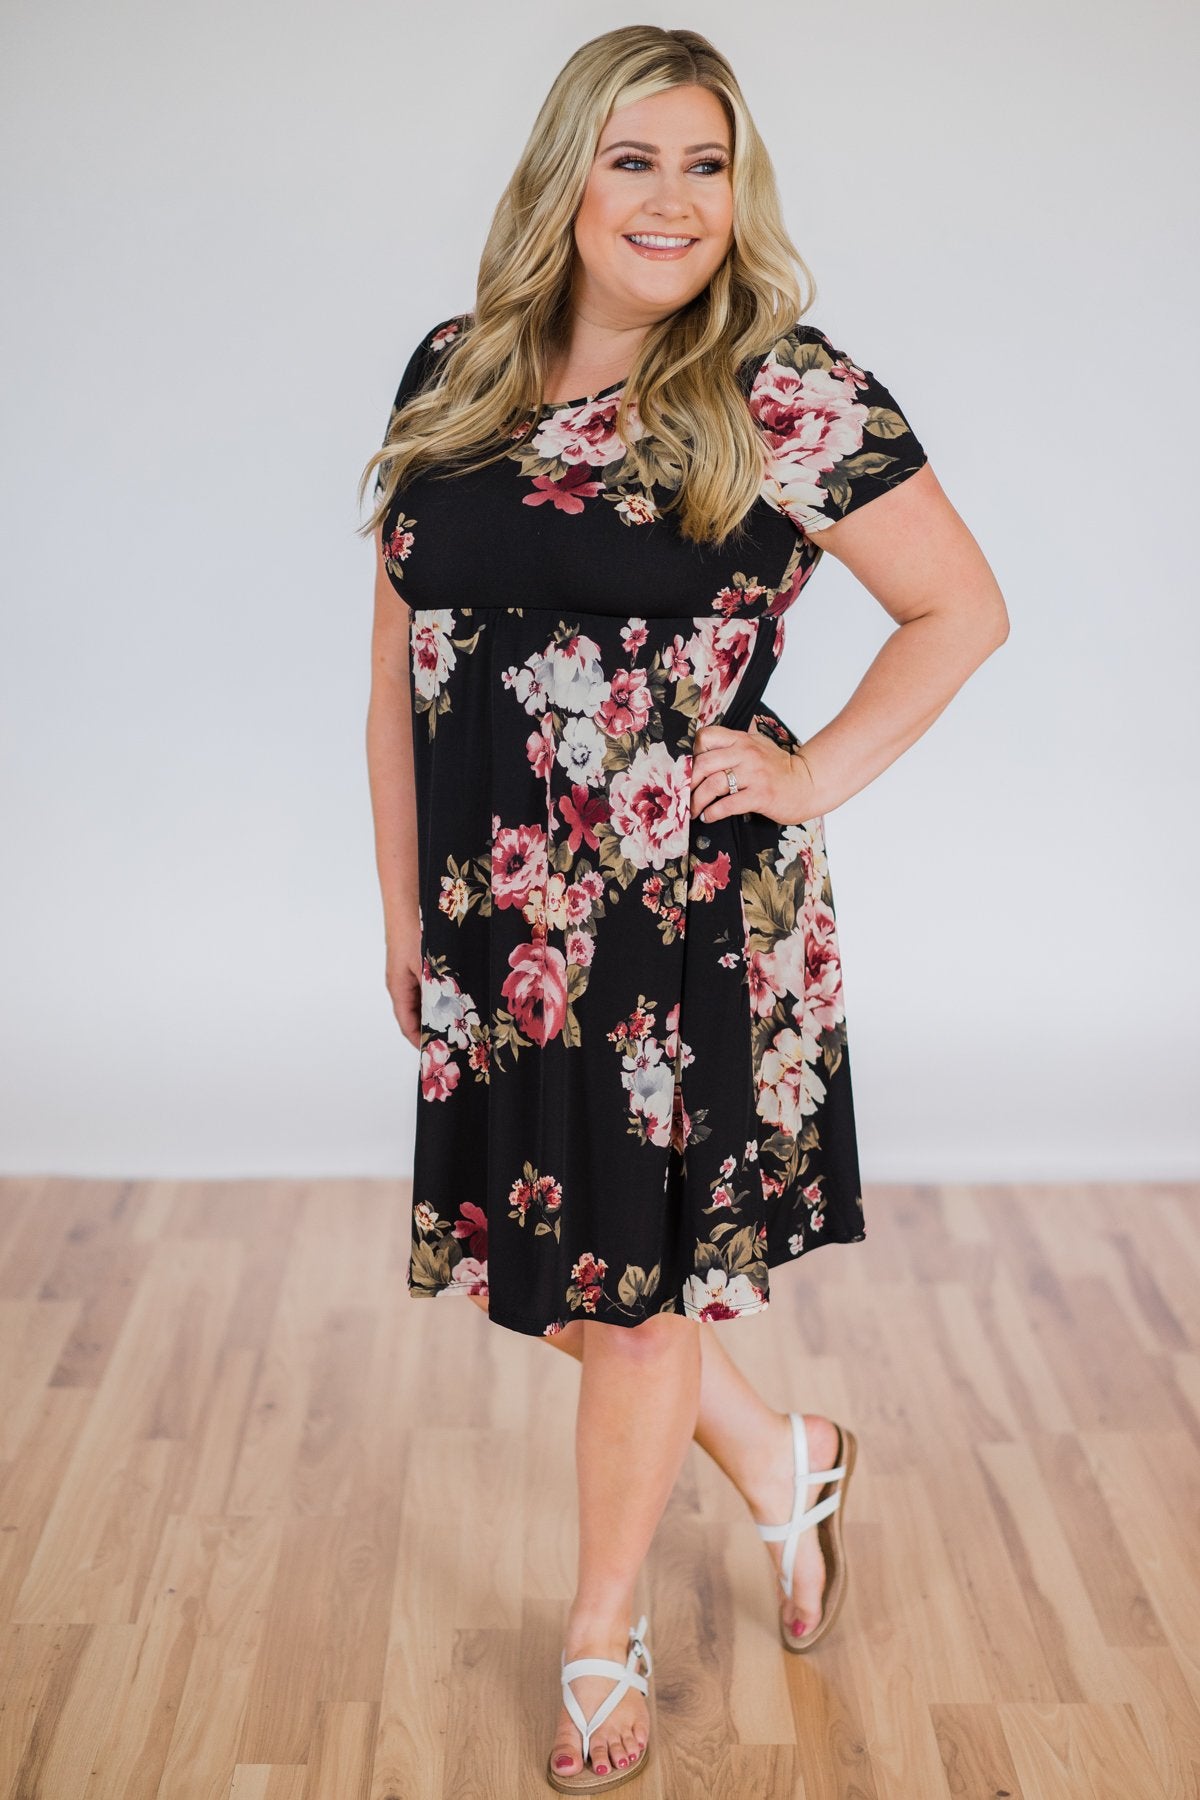 Best Is Yet To Come Floral Short Sleeve Dress- Black